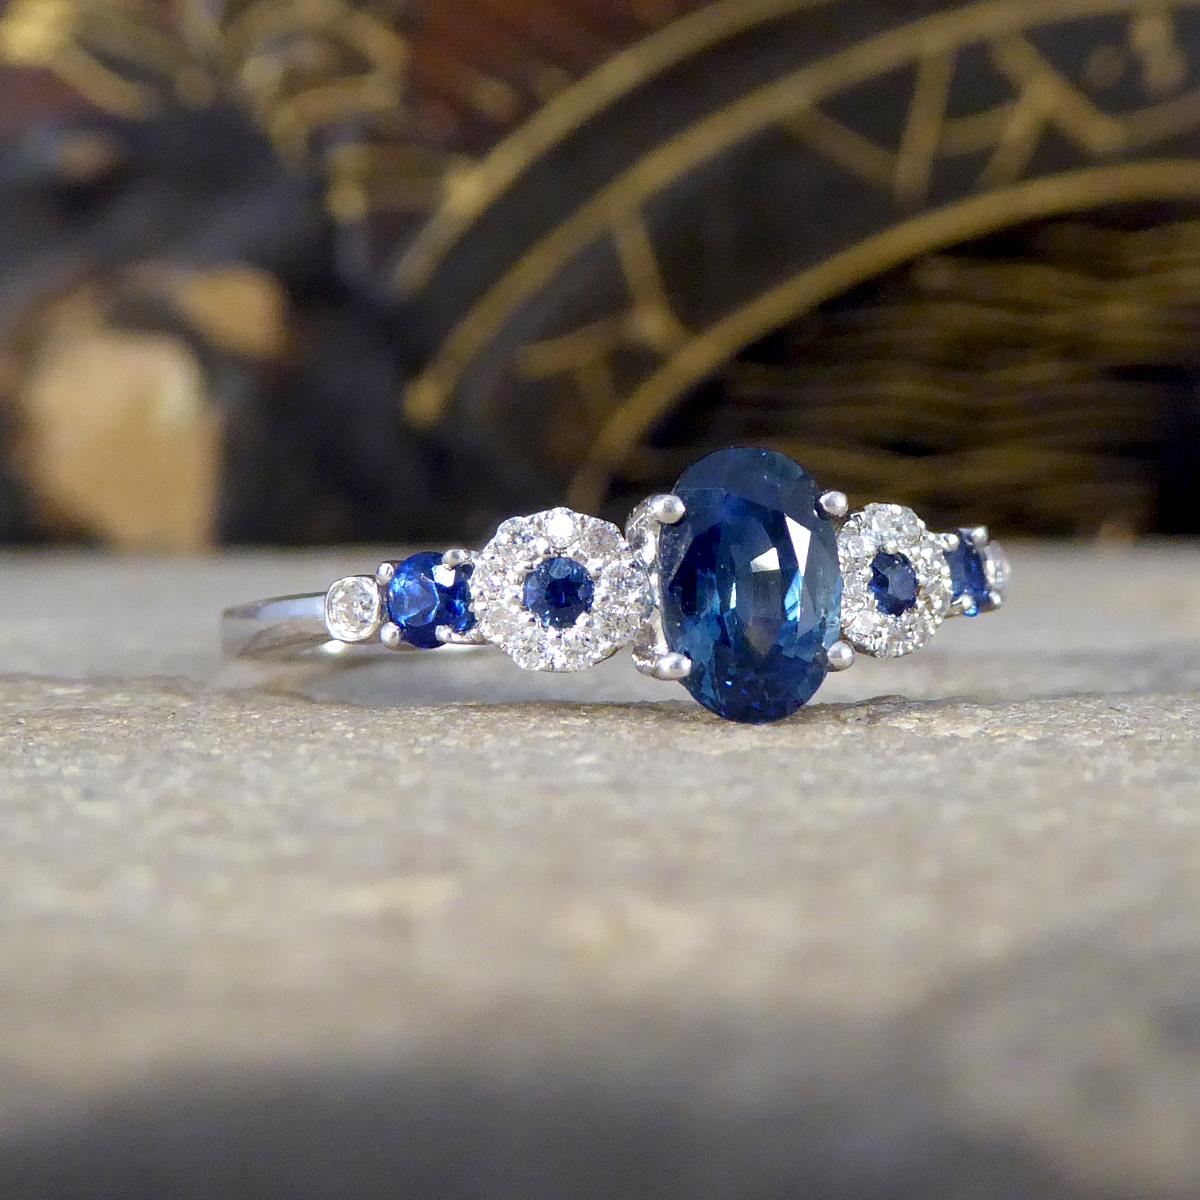 this ring shows a captivating symphony of colour and brilliance all set in 18ct White Gold. At the heart of this extraordinary piece is a resplendent Sapphire, taking centre stage like a star in the night sky. This vibrant gem is flanked by two